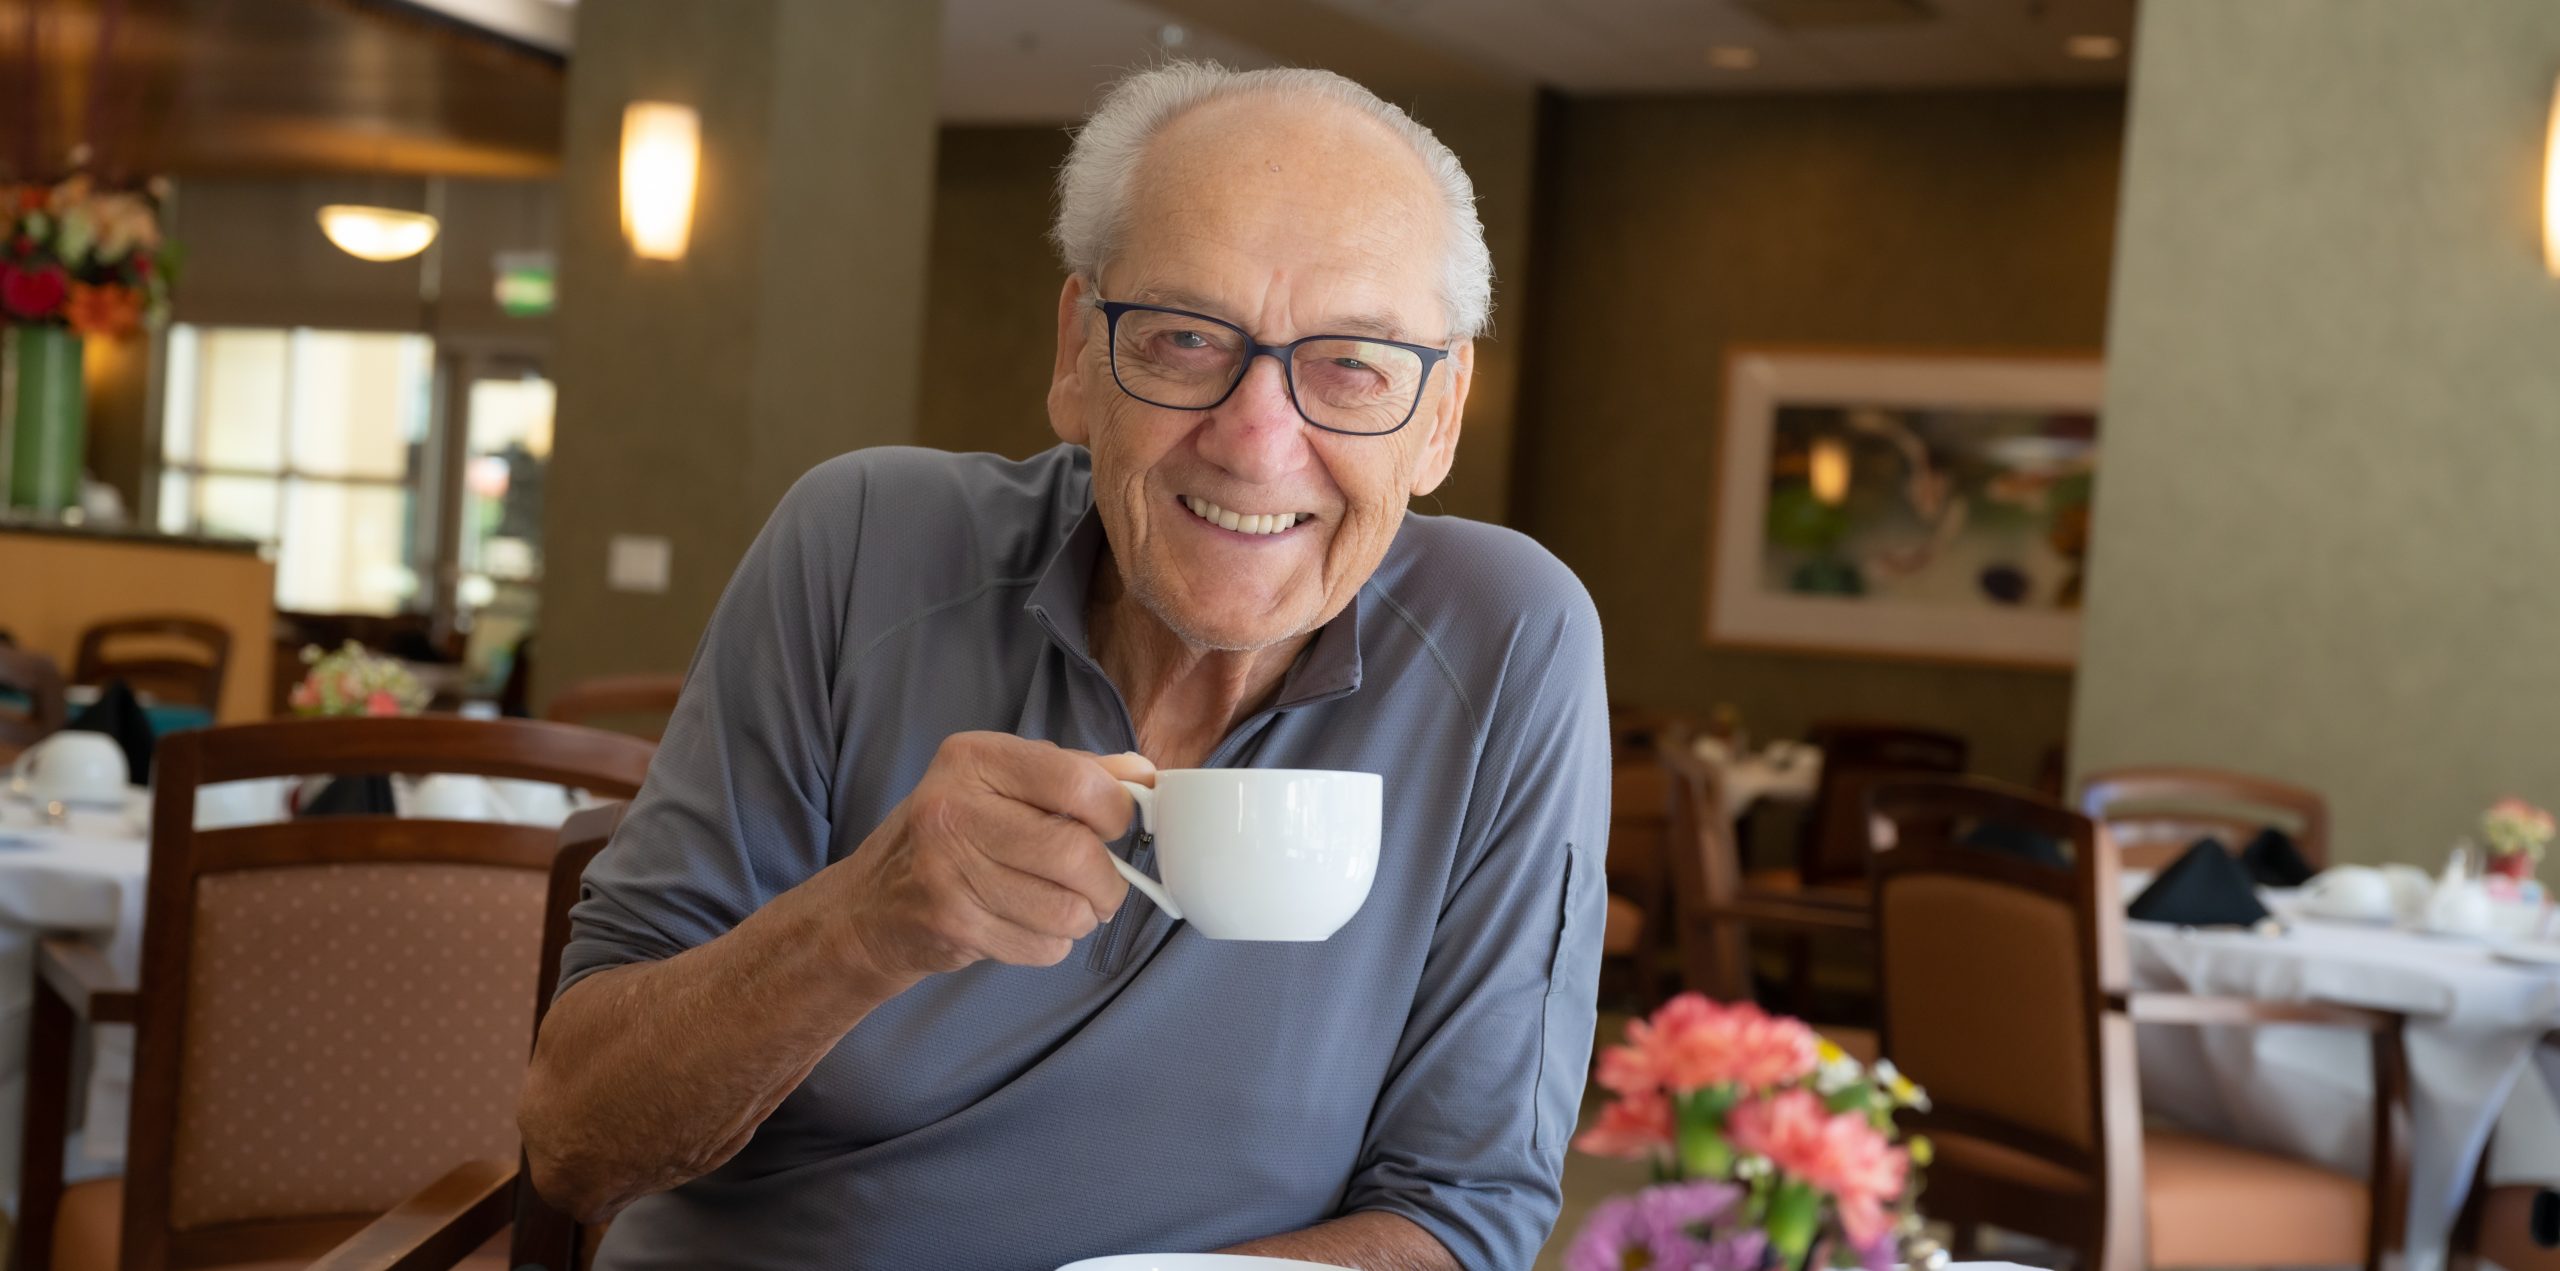 Man drinking coffee and looking at the camera